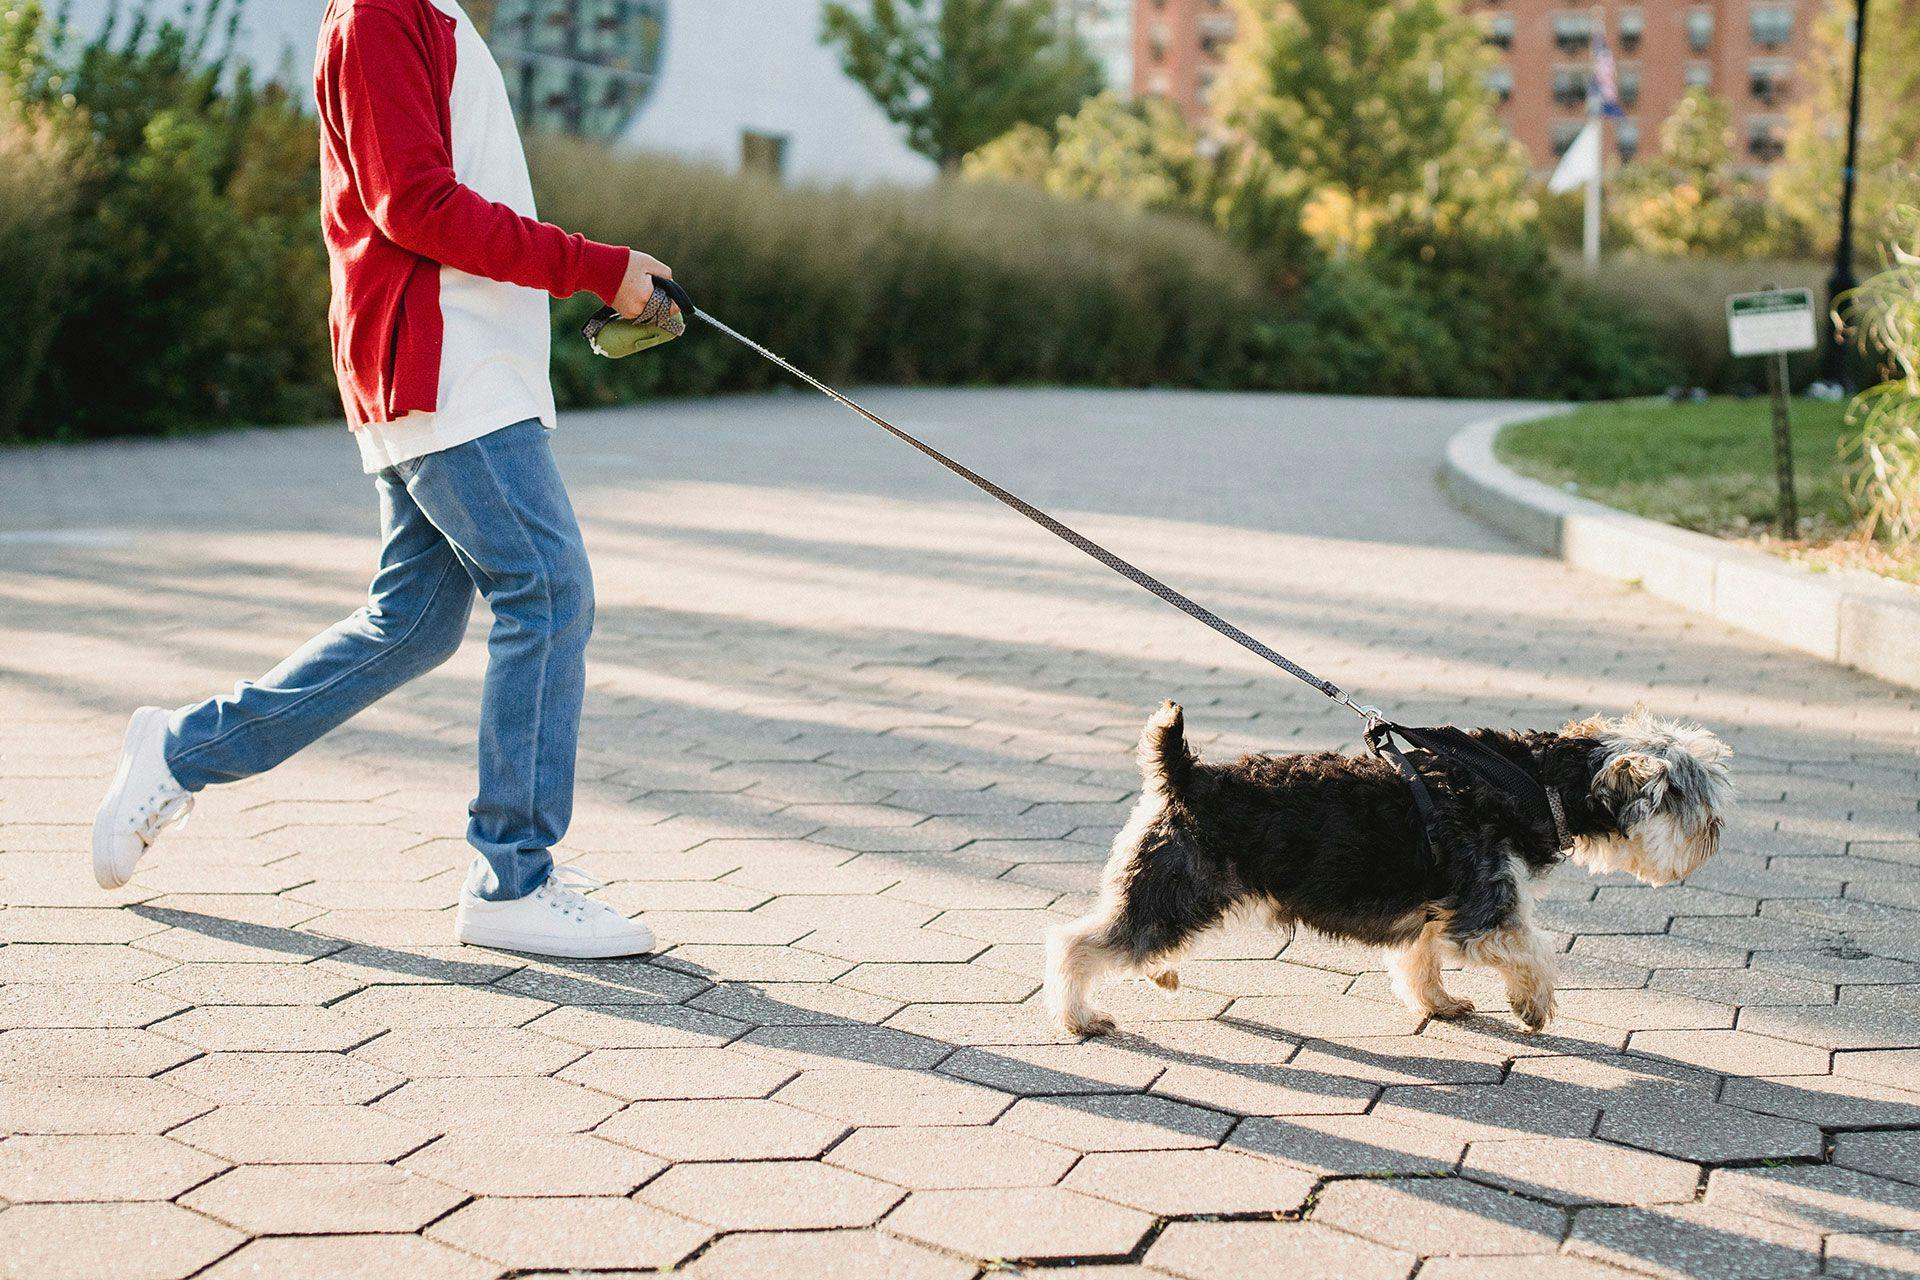 Black and white dog pulling on its owner wearing blue jeans, a white shirt and red sweater